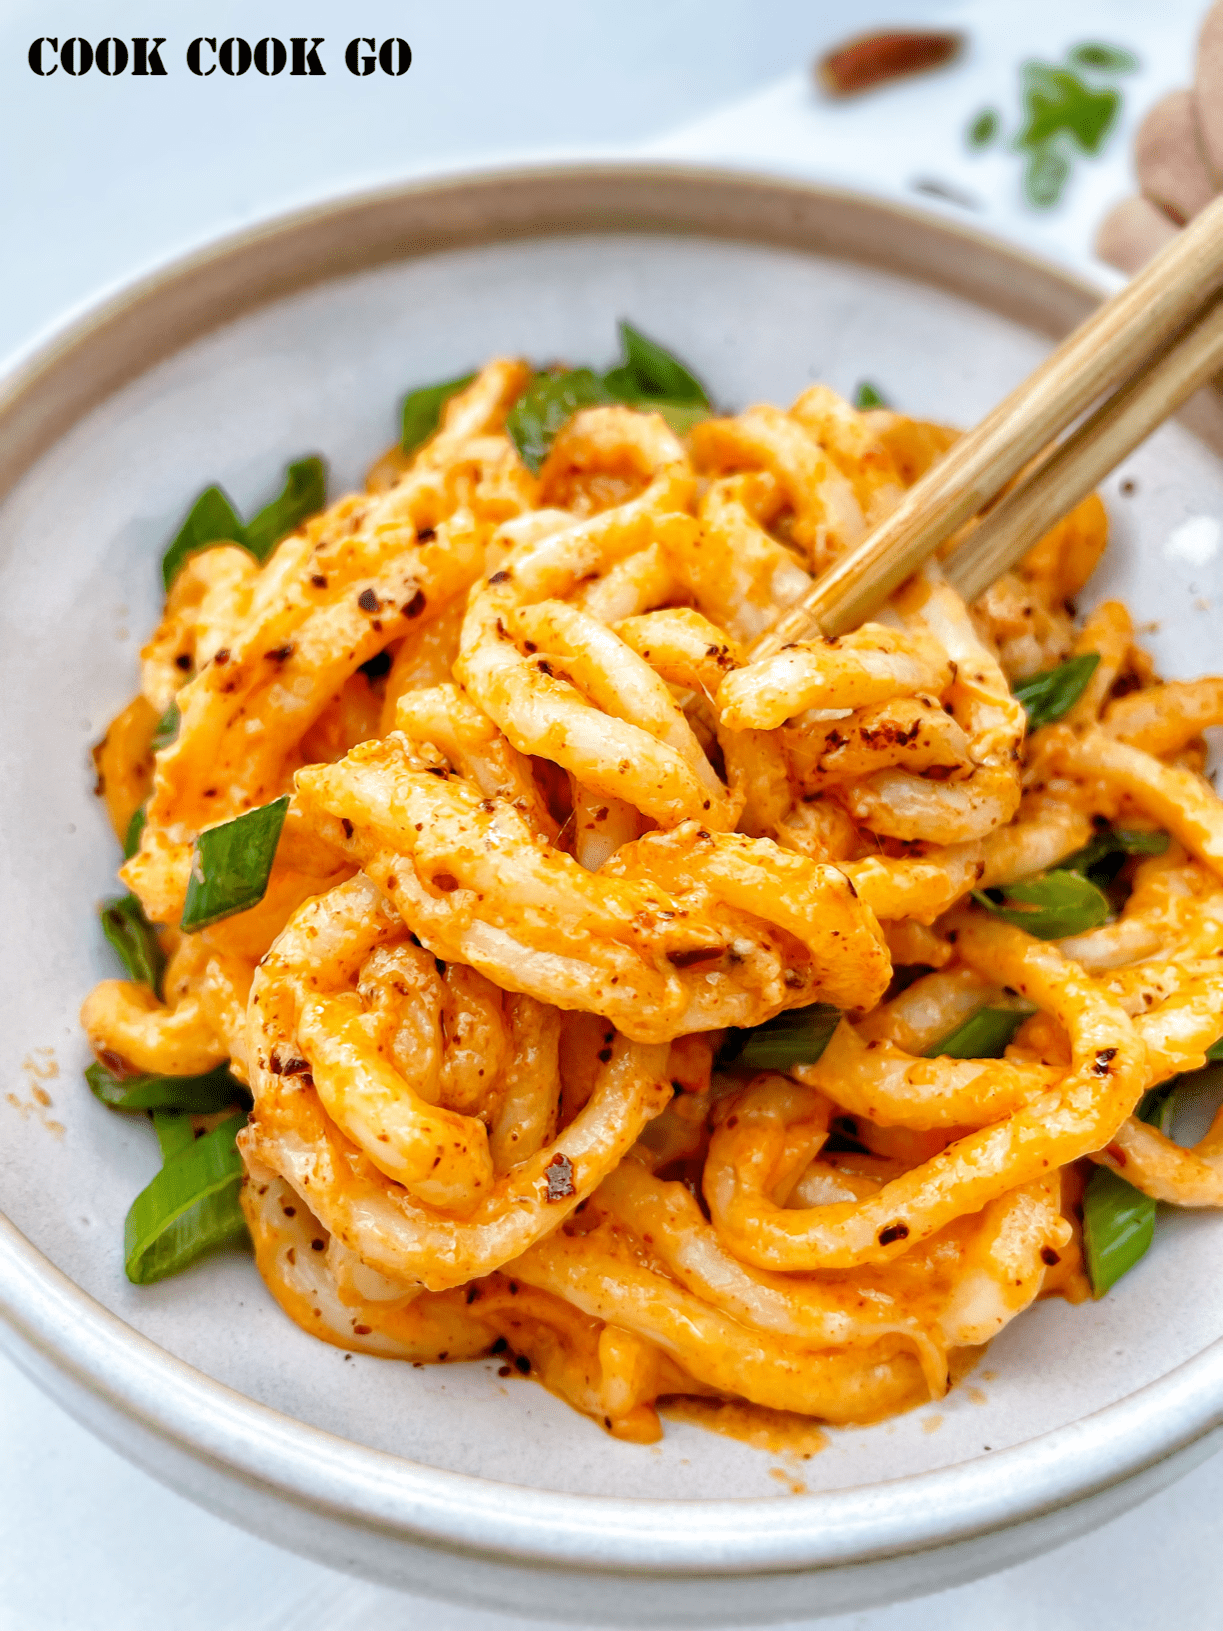 Chili Cheese Udon Noodles